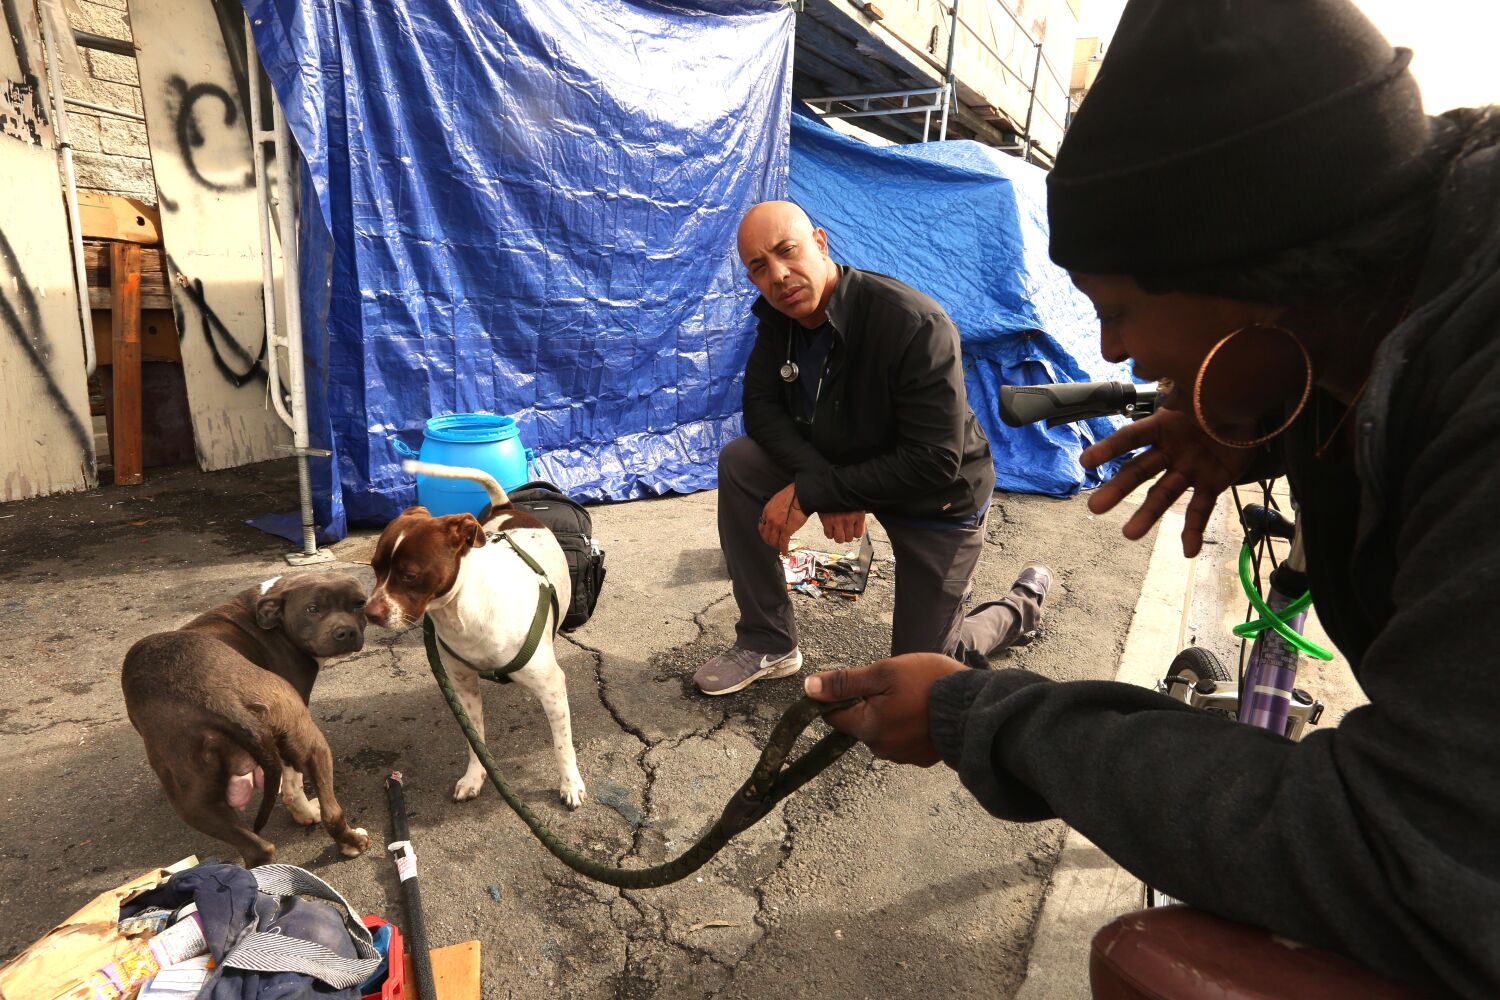 Crusading vet treats some of L.A.'s most cherished residents: The pets of skid row